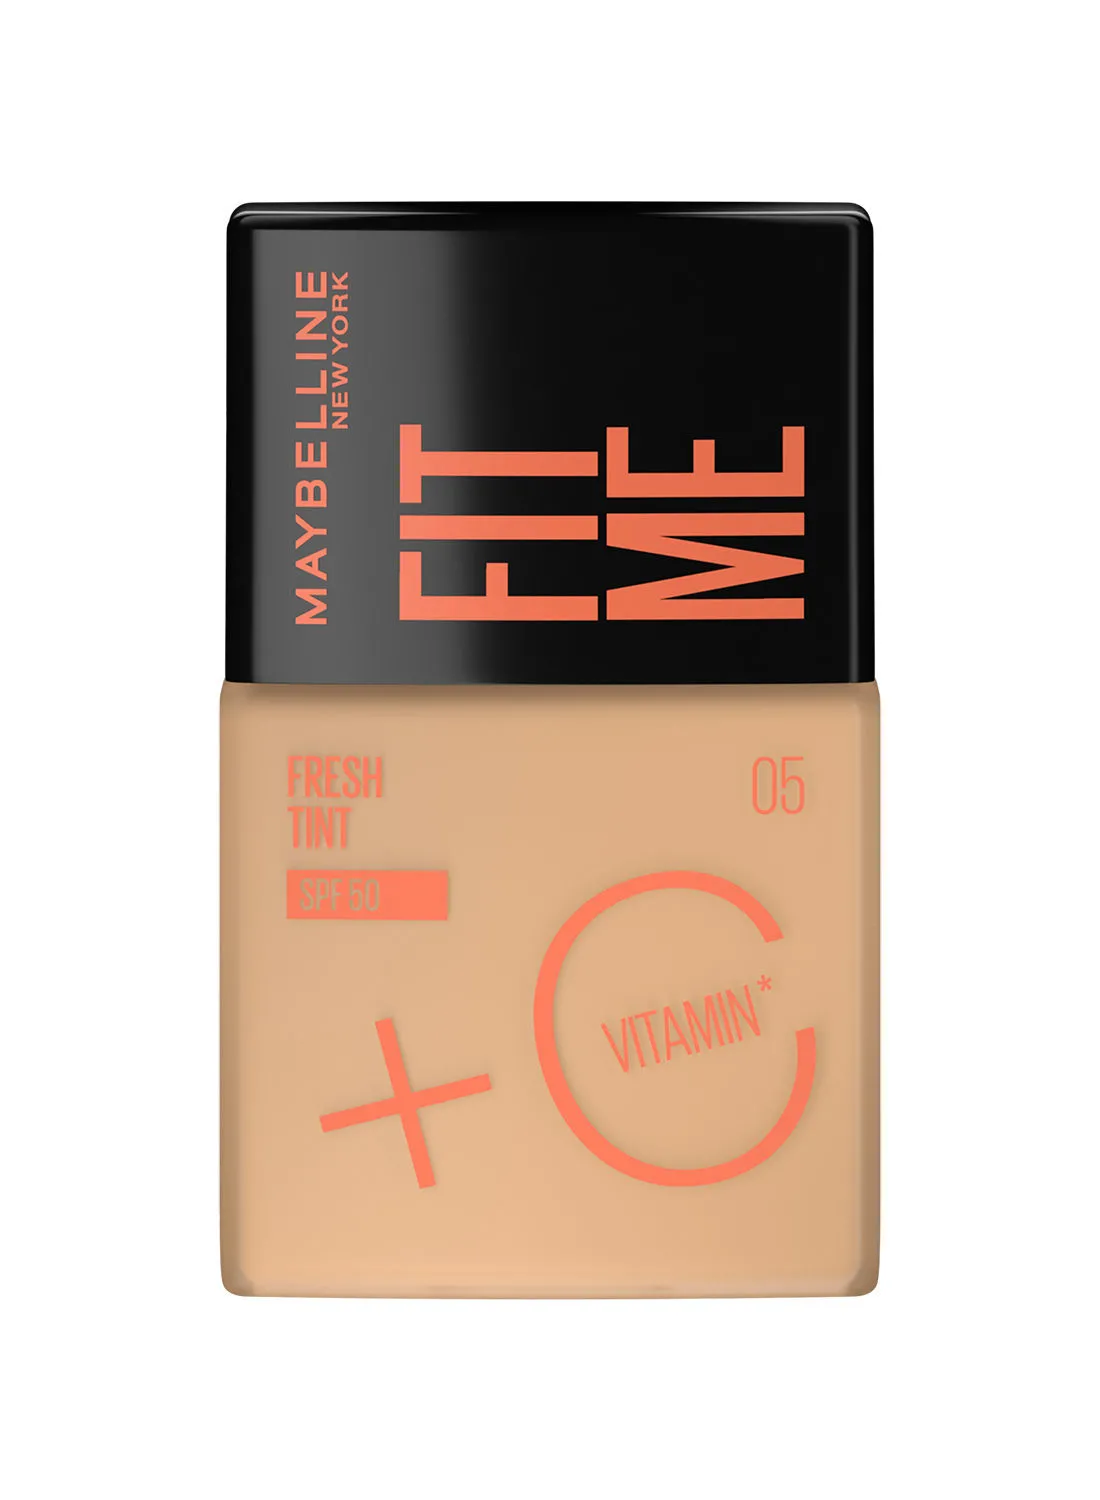 MAYBELLINE NEW YORK Maybelline New York, Fit Me Fresh Tint SPF 50 with Brightening Vitamin C, 05